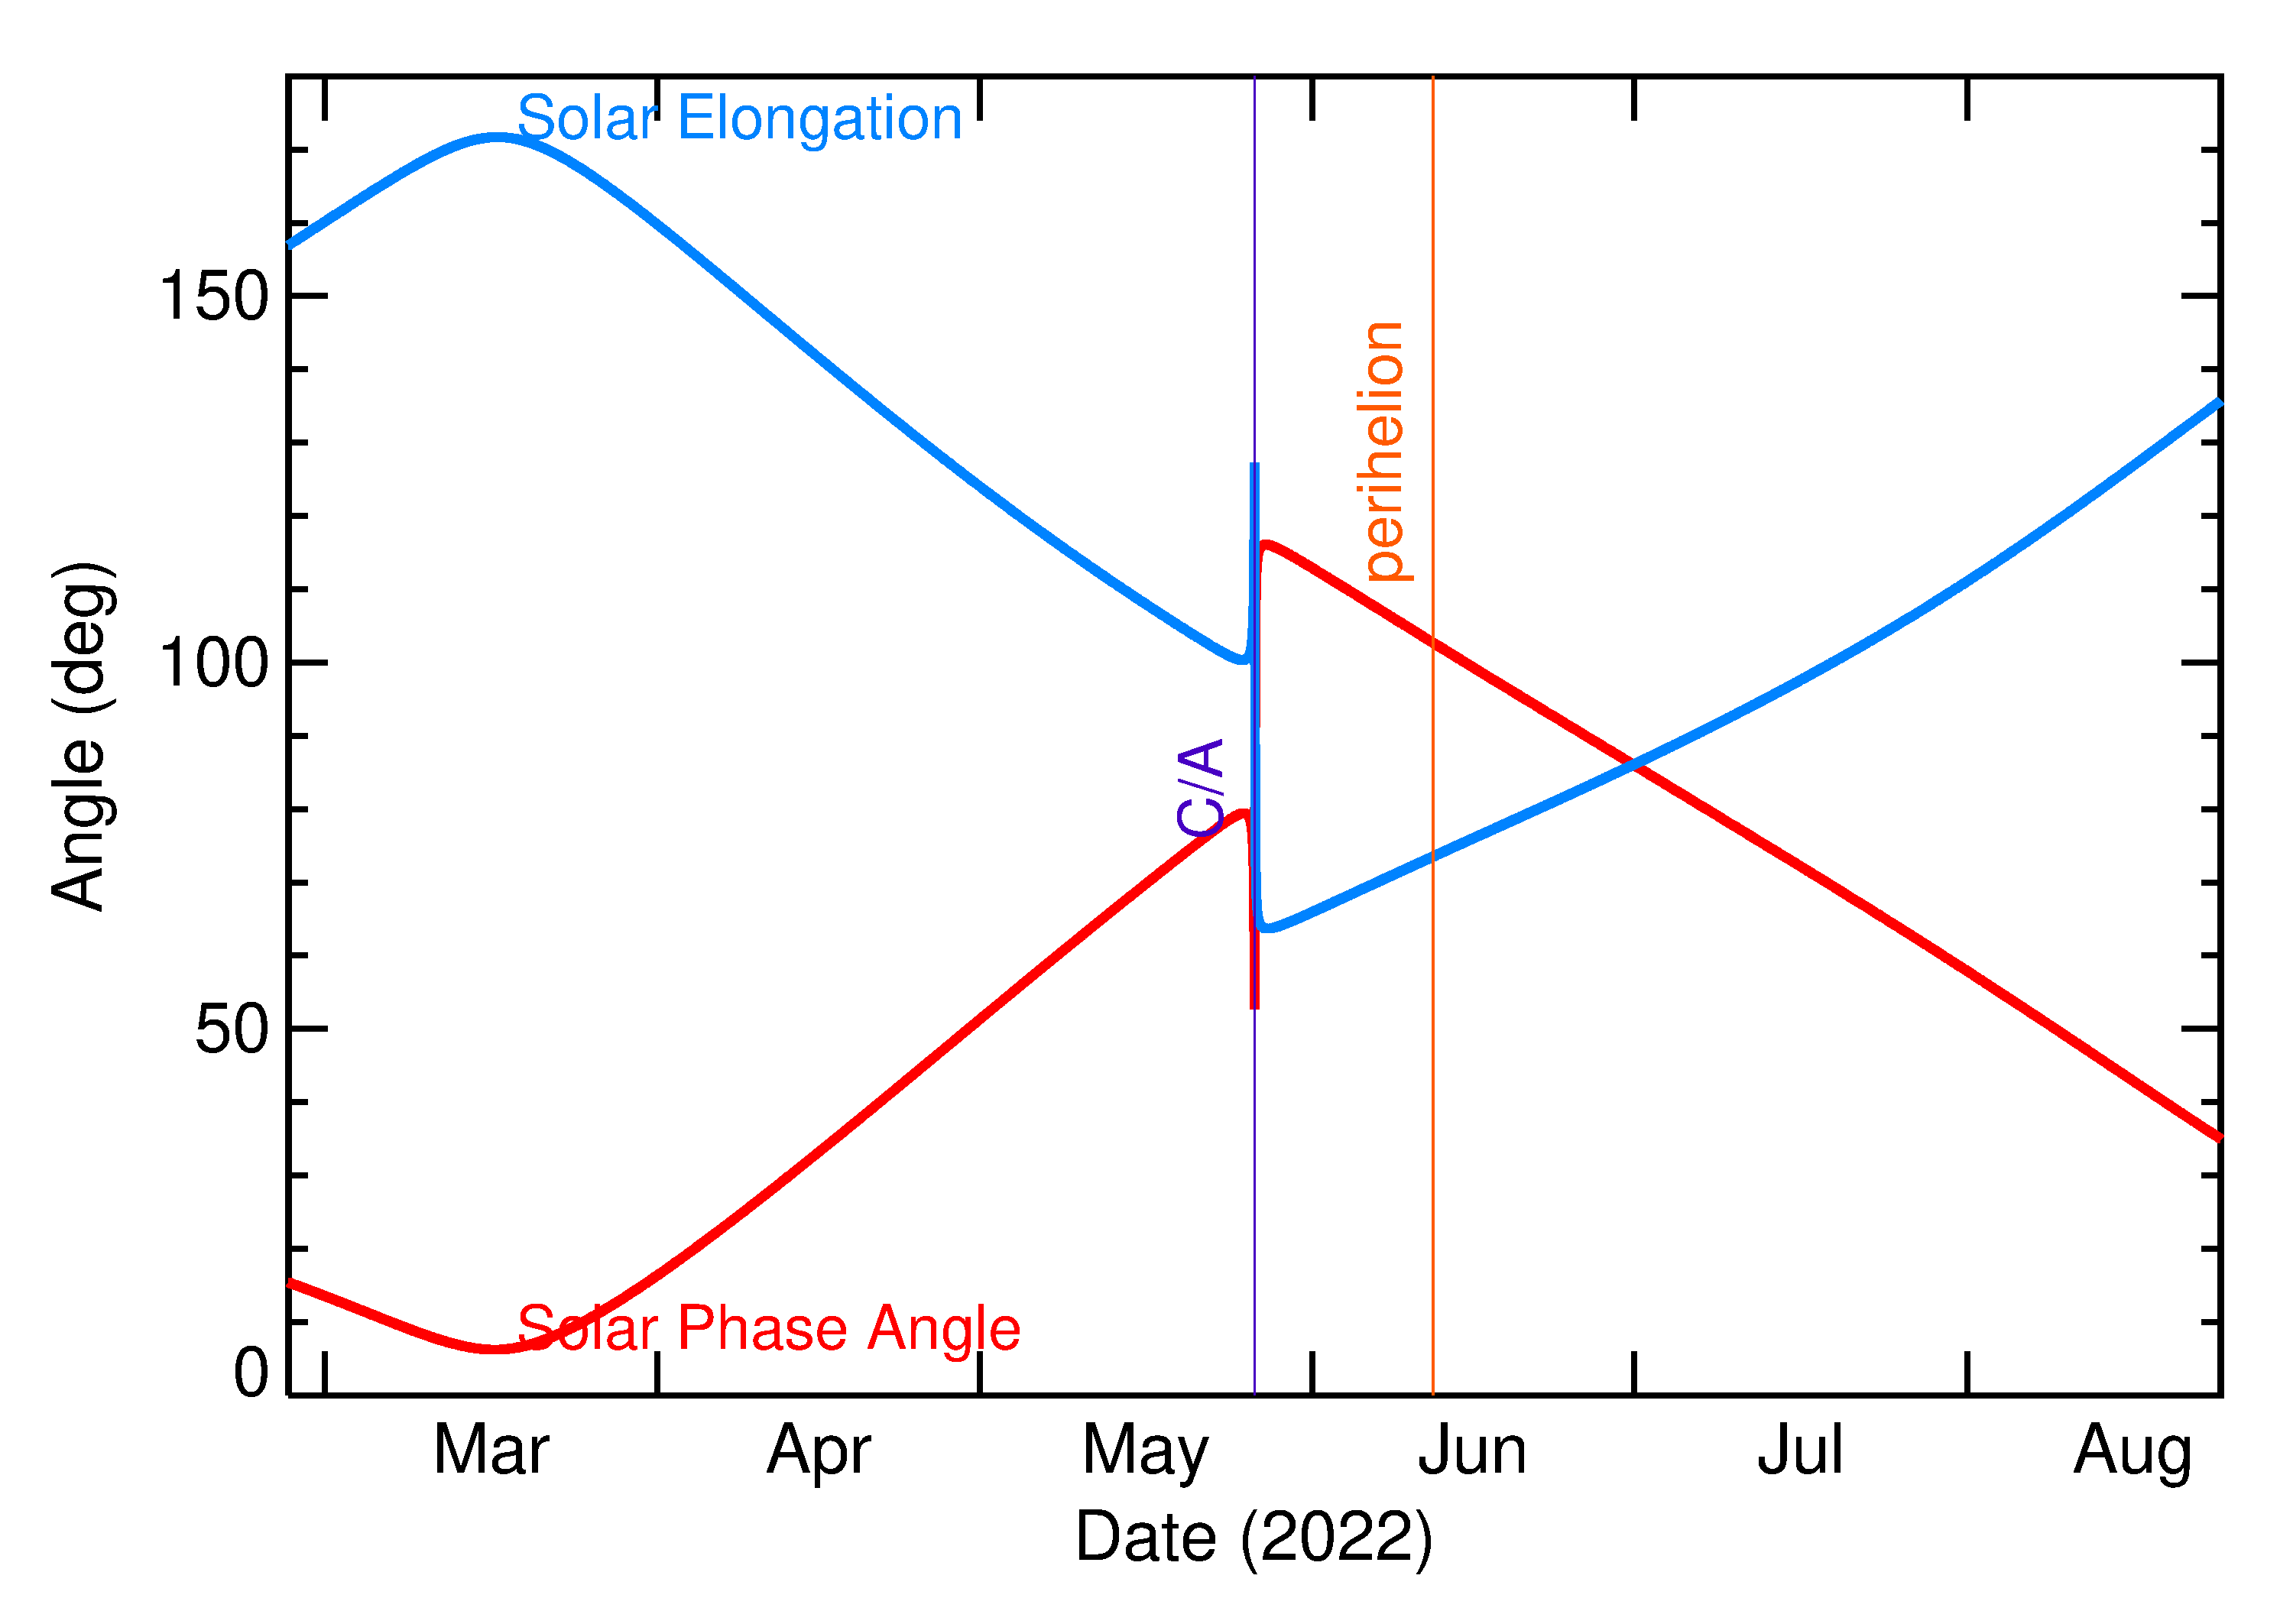 Solar Elongation and Solar Phase Angle of 2022 KP6 in the months around closest approach